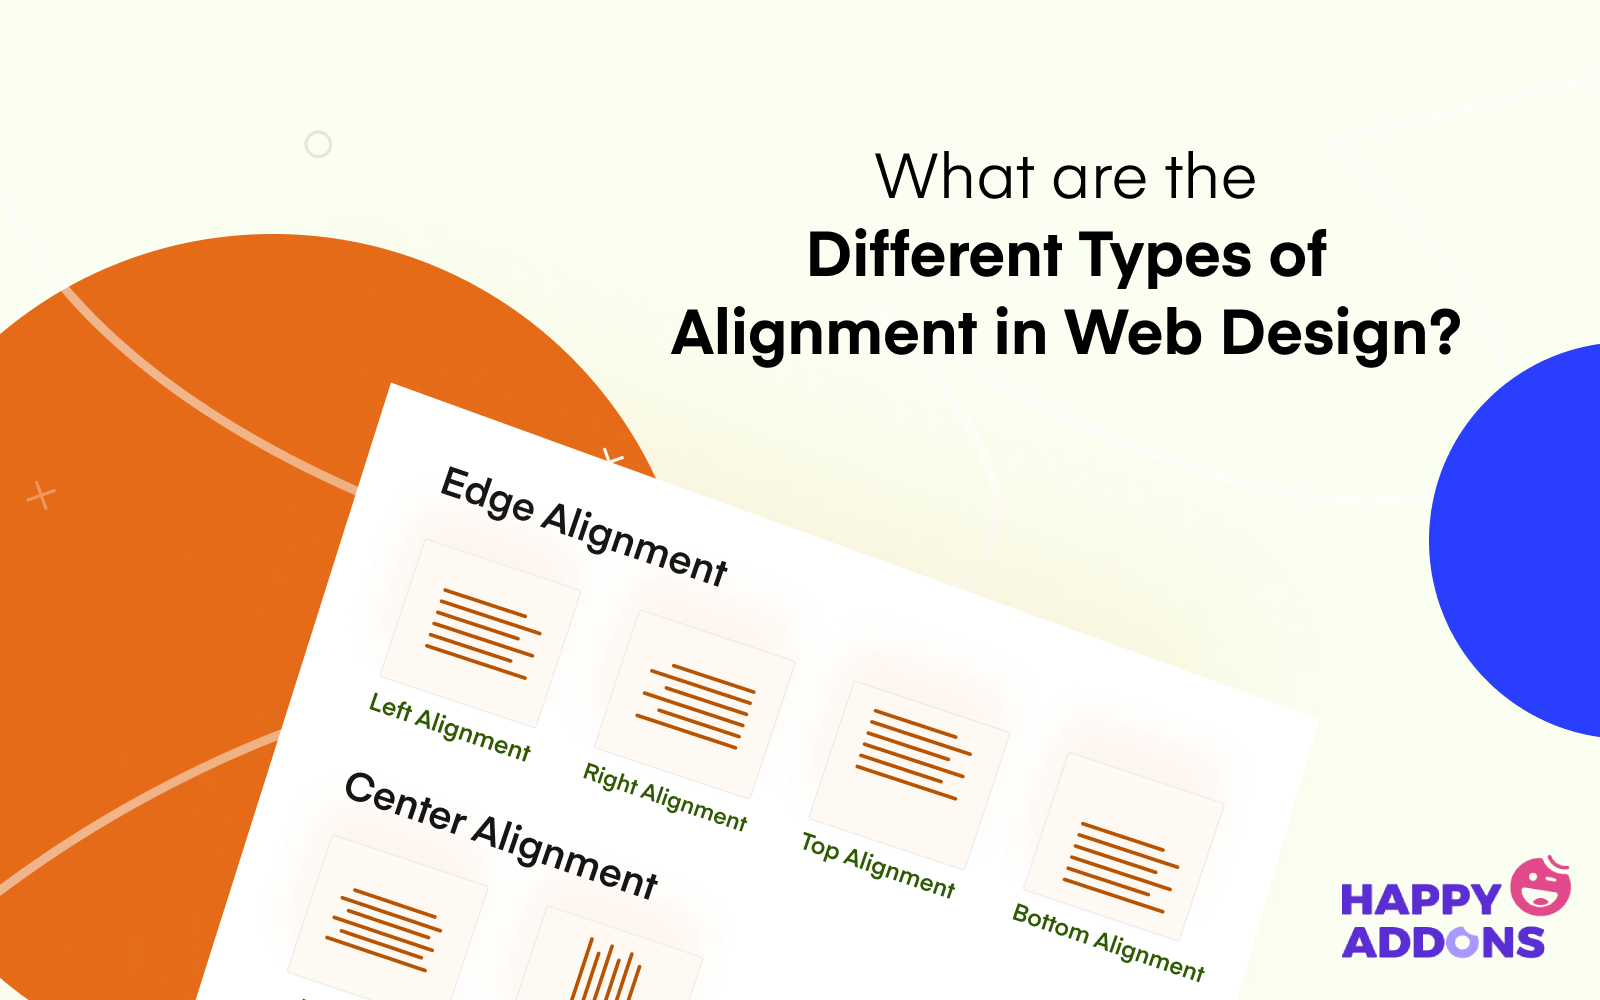 What are the Different Types of Alignment in Web Design?